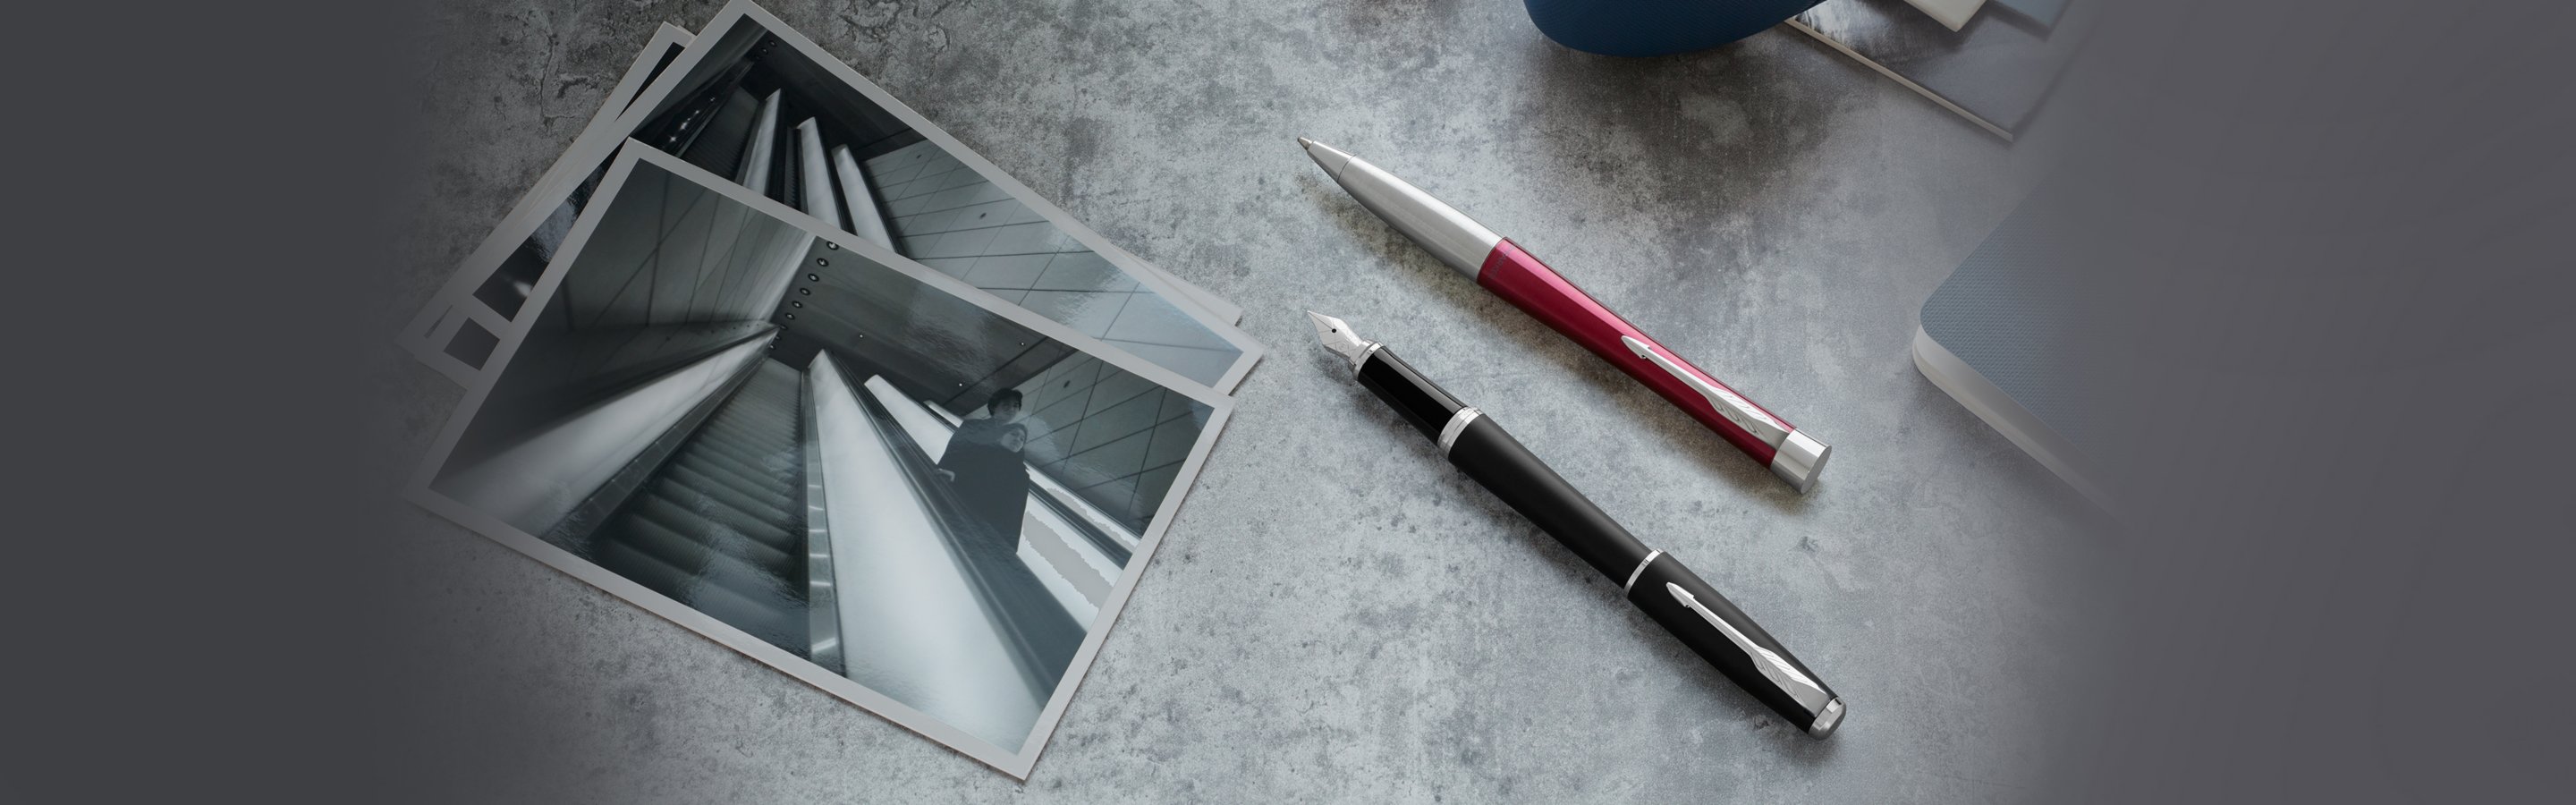 An Urban ballpoint pen with chrome trim laid on a desk near a folded pair of glasses.